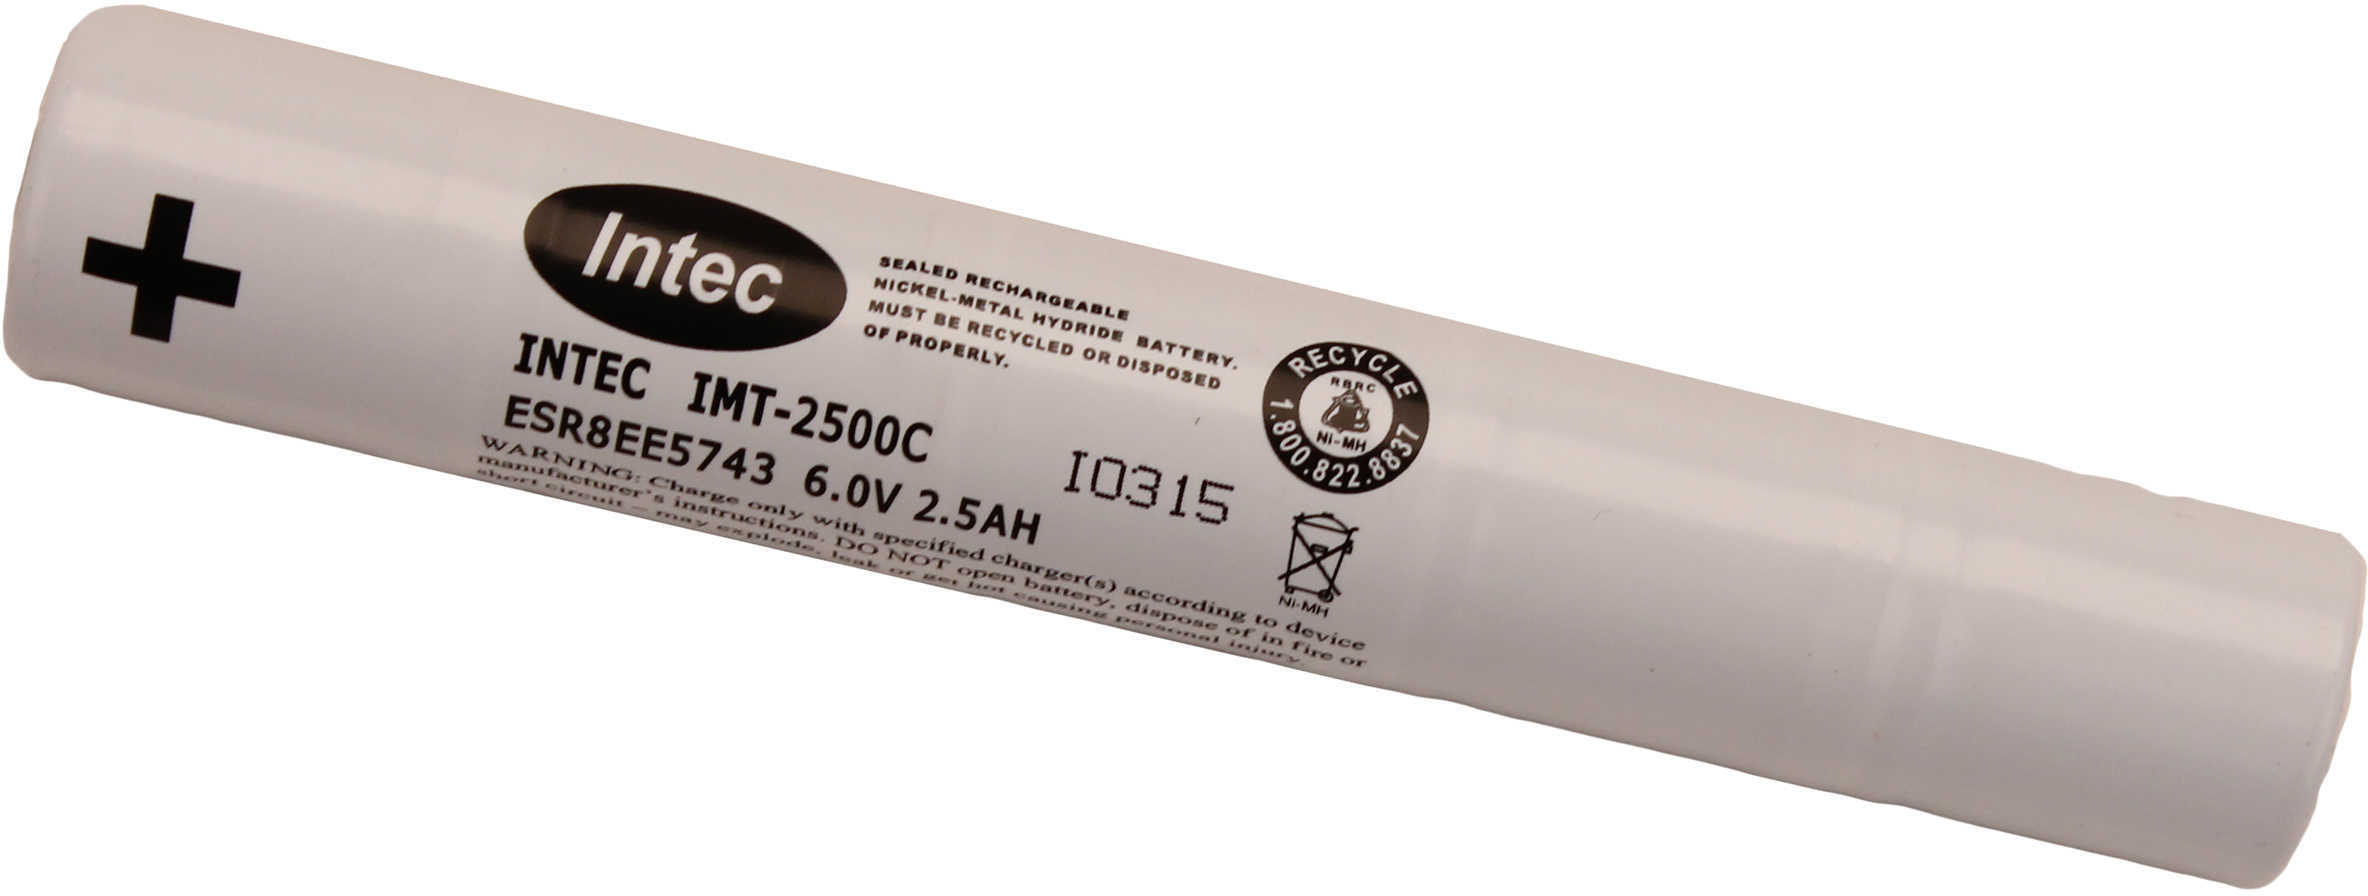 Maglite NiMH Replacement Battery Md: Ml125-A3015